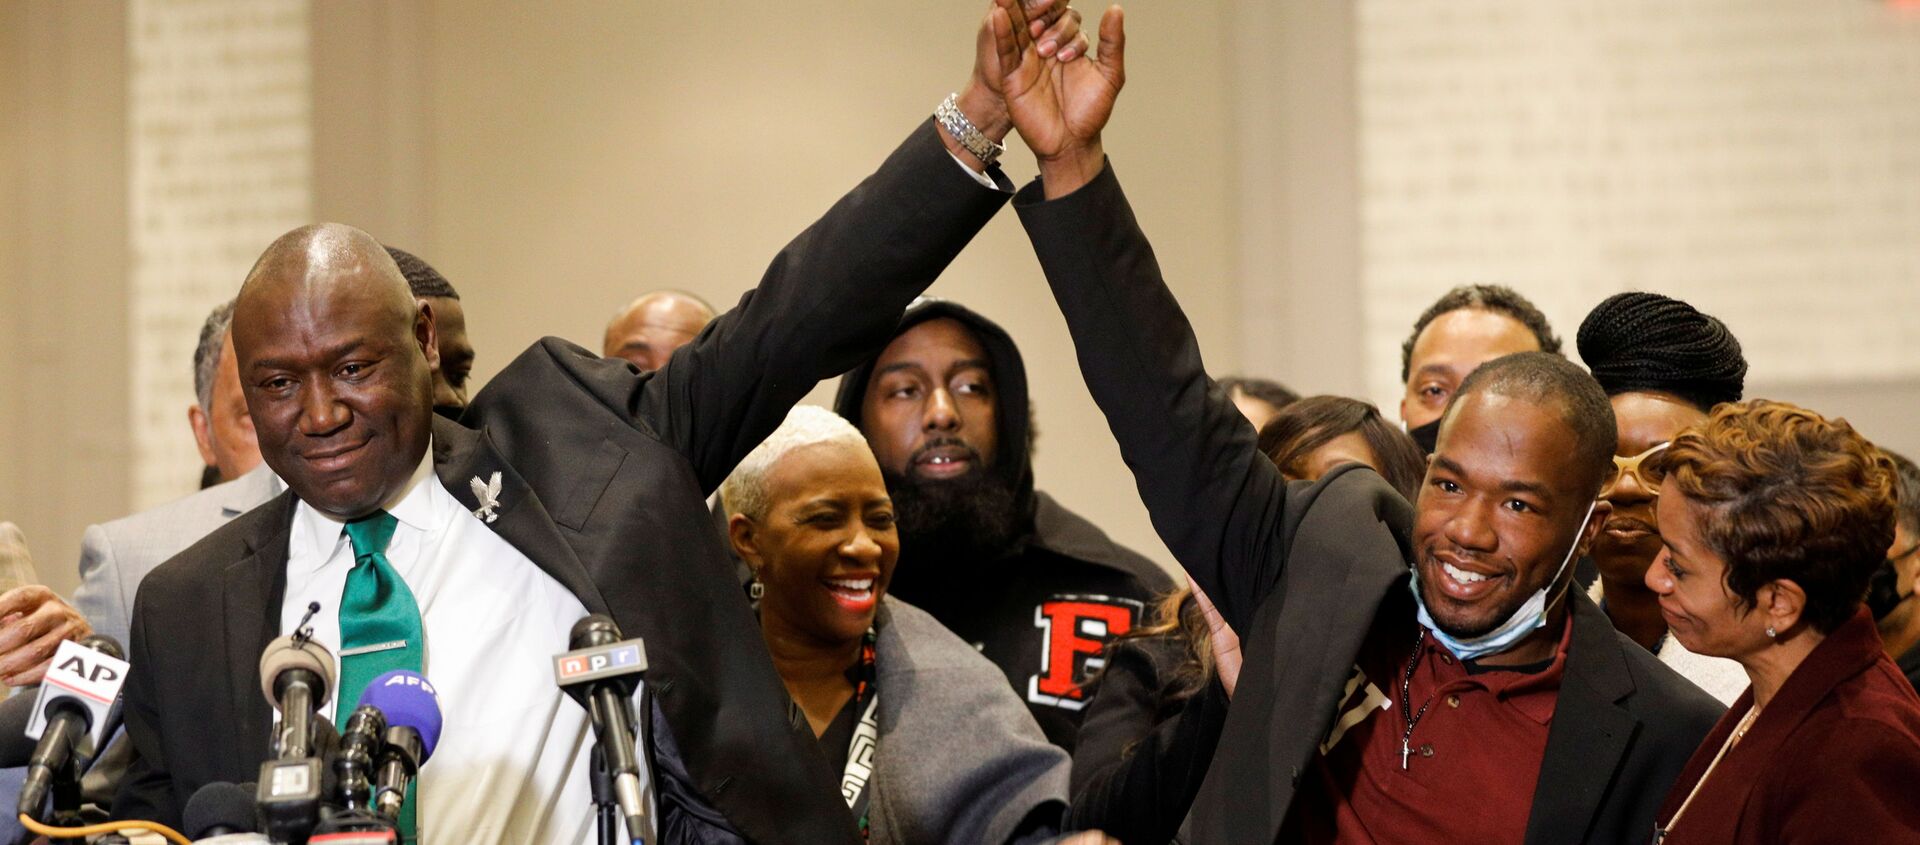 Floyd family attorney Ben Crump holds hands with witness Donald Williams during a news conference following the verdict in the trial of former Minneapolis police officer Derek Chauvin, found guilty of the death of George Floyd, in Minneapolis, Minnesota, U.S., April 20, 2021 - Sputnik International, 1920